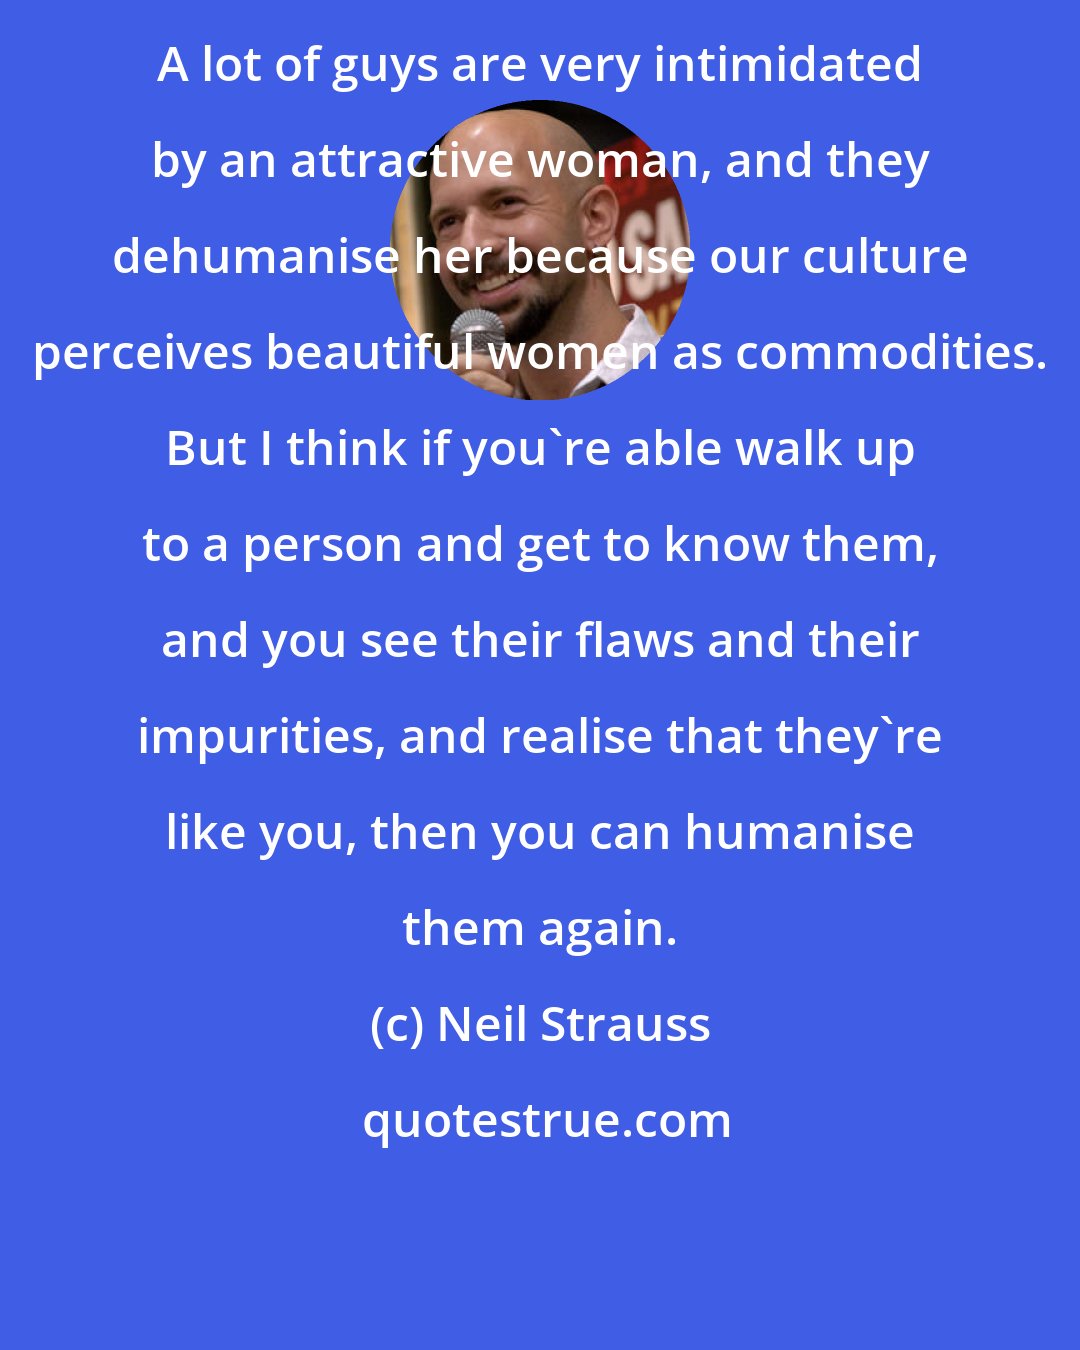 Neil Strauss: A lot of guys are very intimidated by an attractive woman, and they dehumanise her because our culture perceives beautiful women as commodities. But I think if you're able walk up to a person and get to know them, and you see their flaws and their impurities, and realise that they're like you, then you can humanise them again.